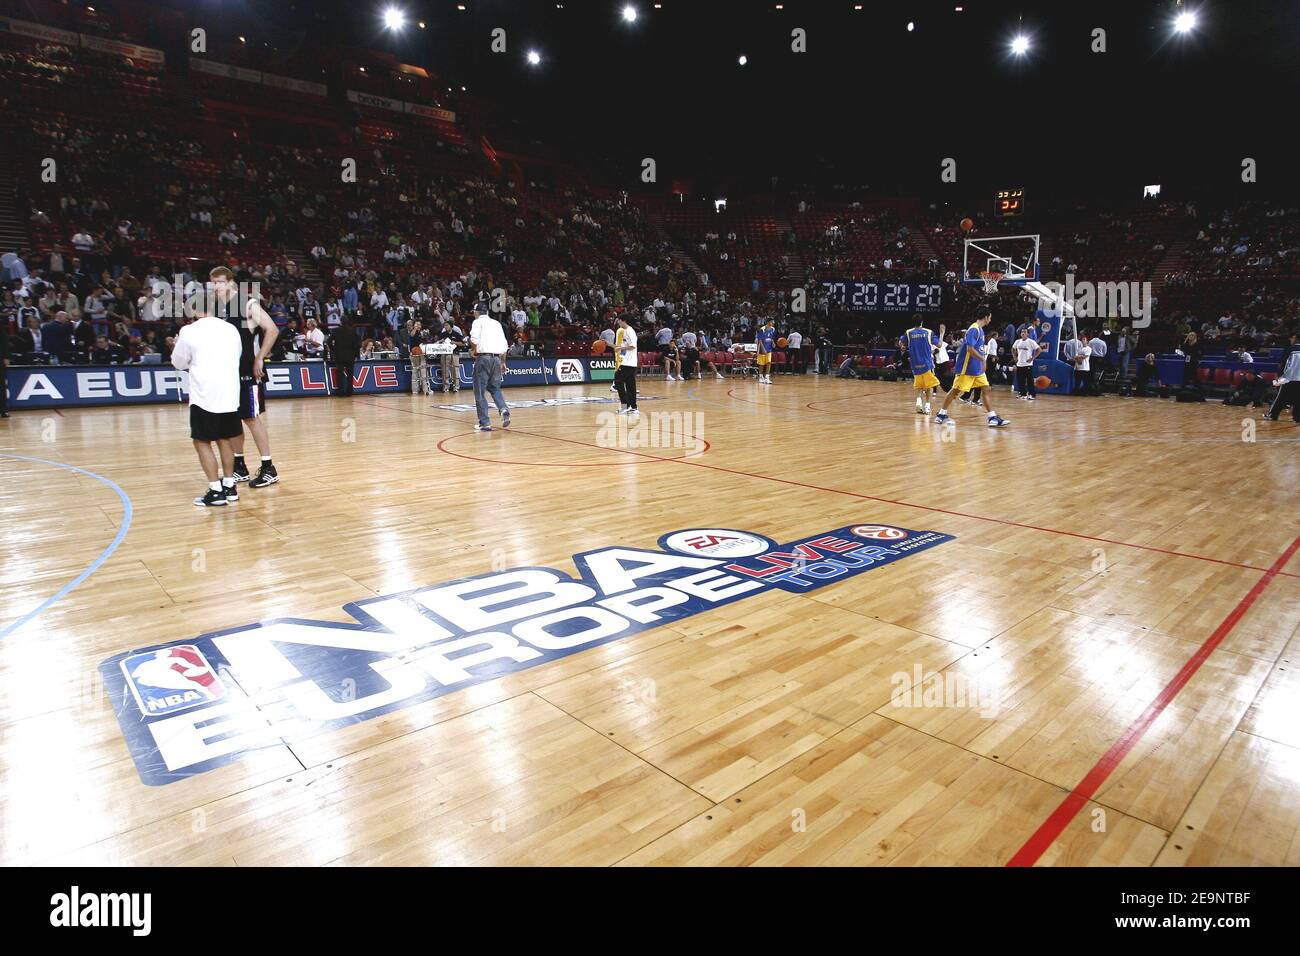 Atmosphere during an exhibition match at the Bercy Stadium in Paris, France  on October 8, 2006. San Antonio Spurs is in Paris as part of NBA Europe  Live tour, a promotional event